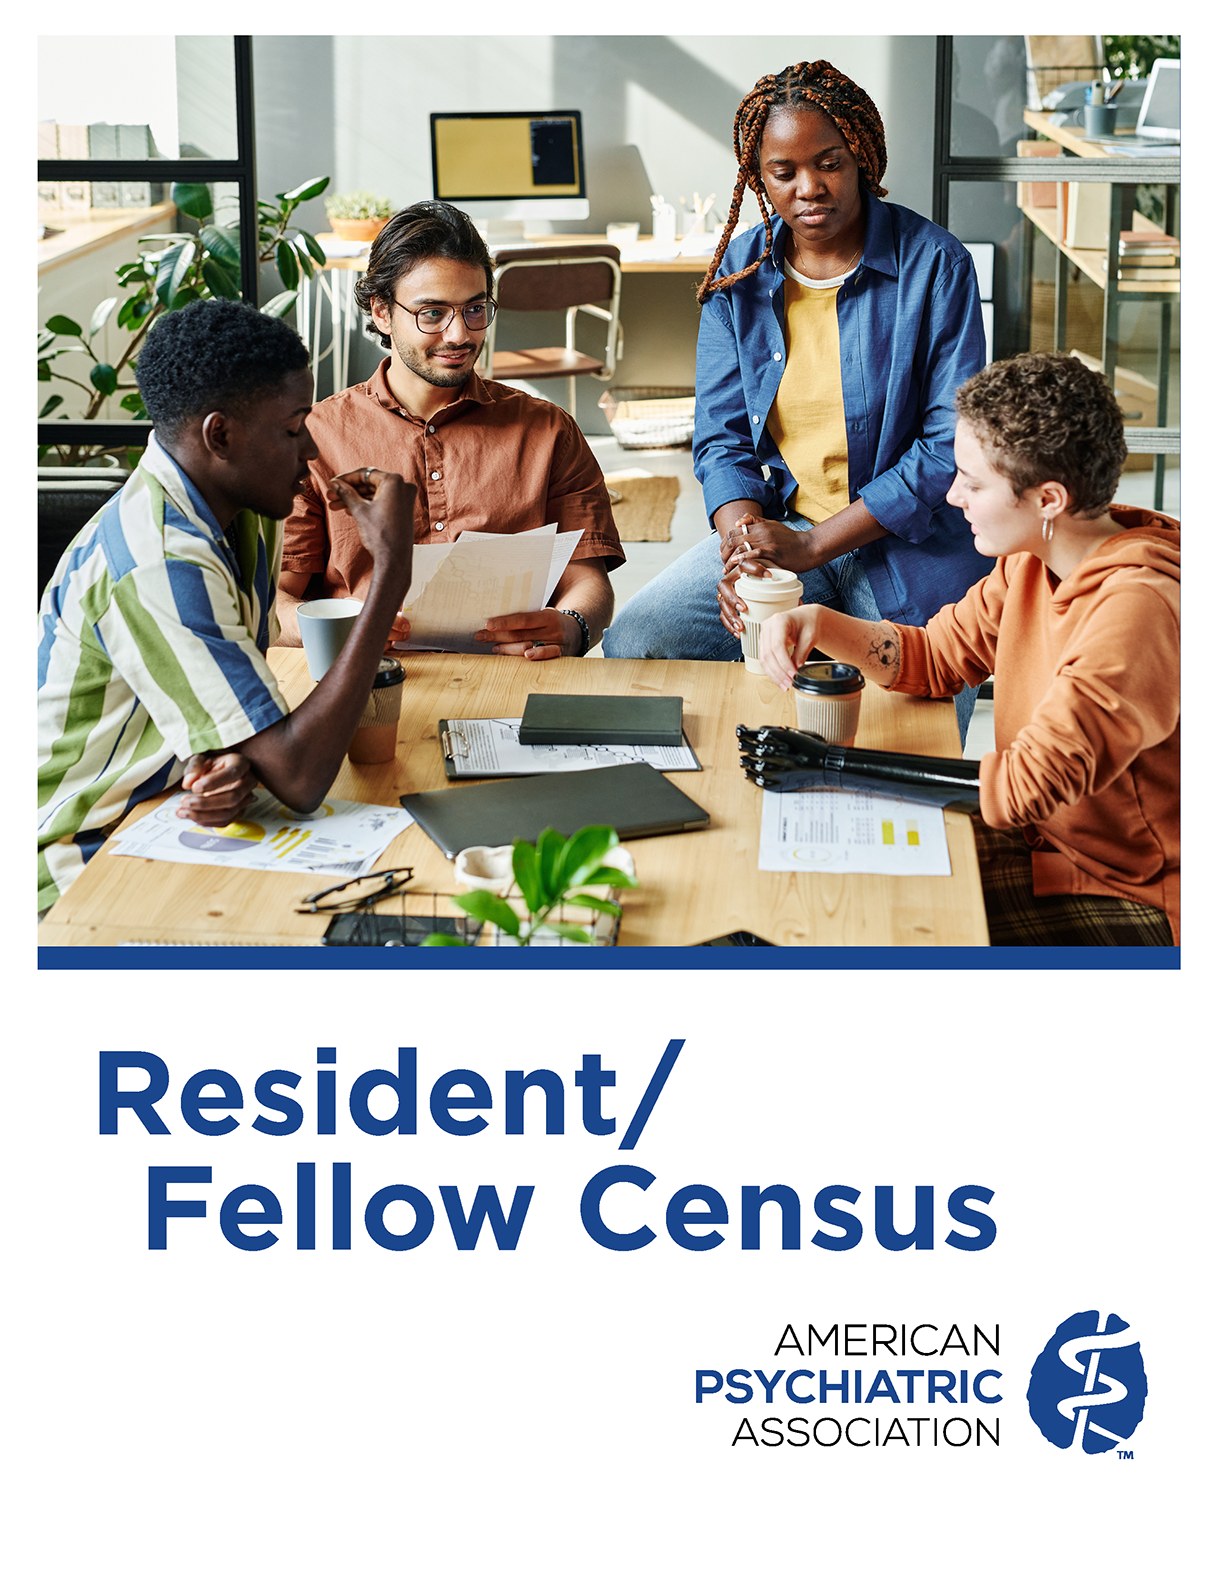 Cover of the Resident Fellow Census from the American Psychiatric Association